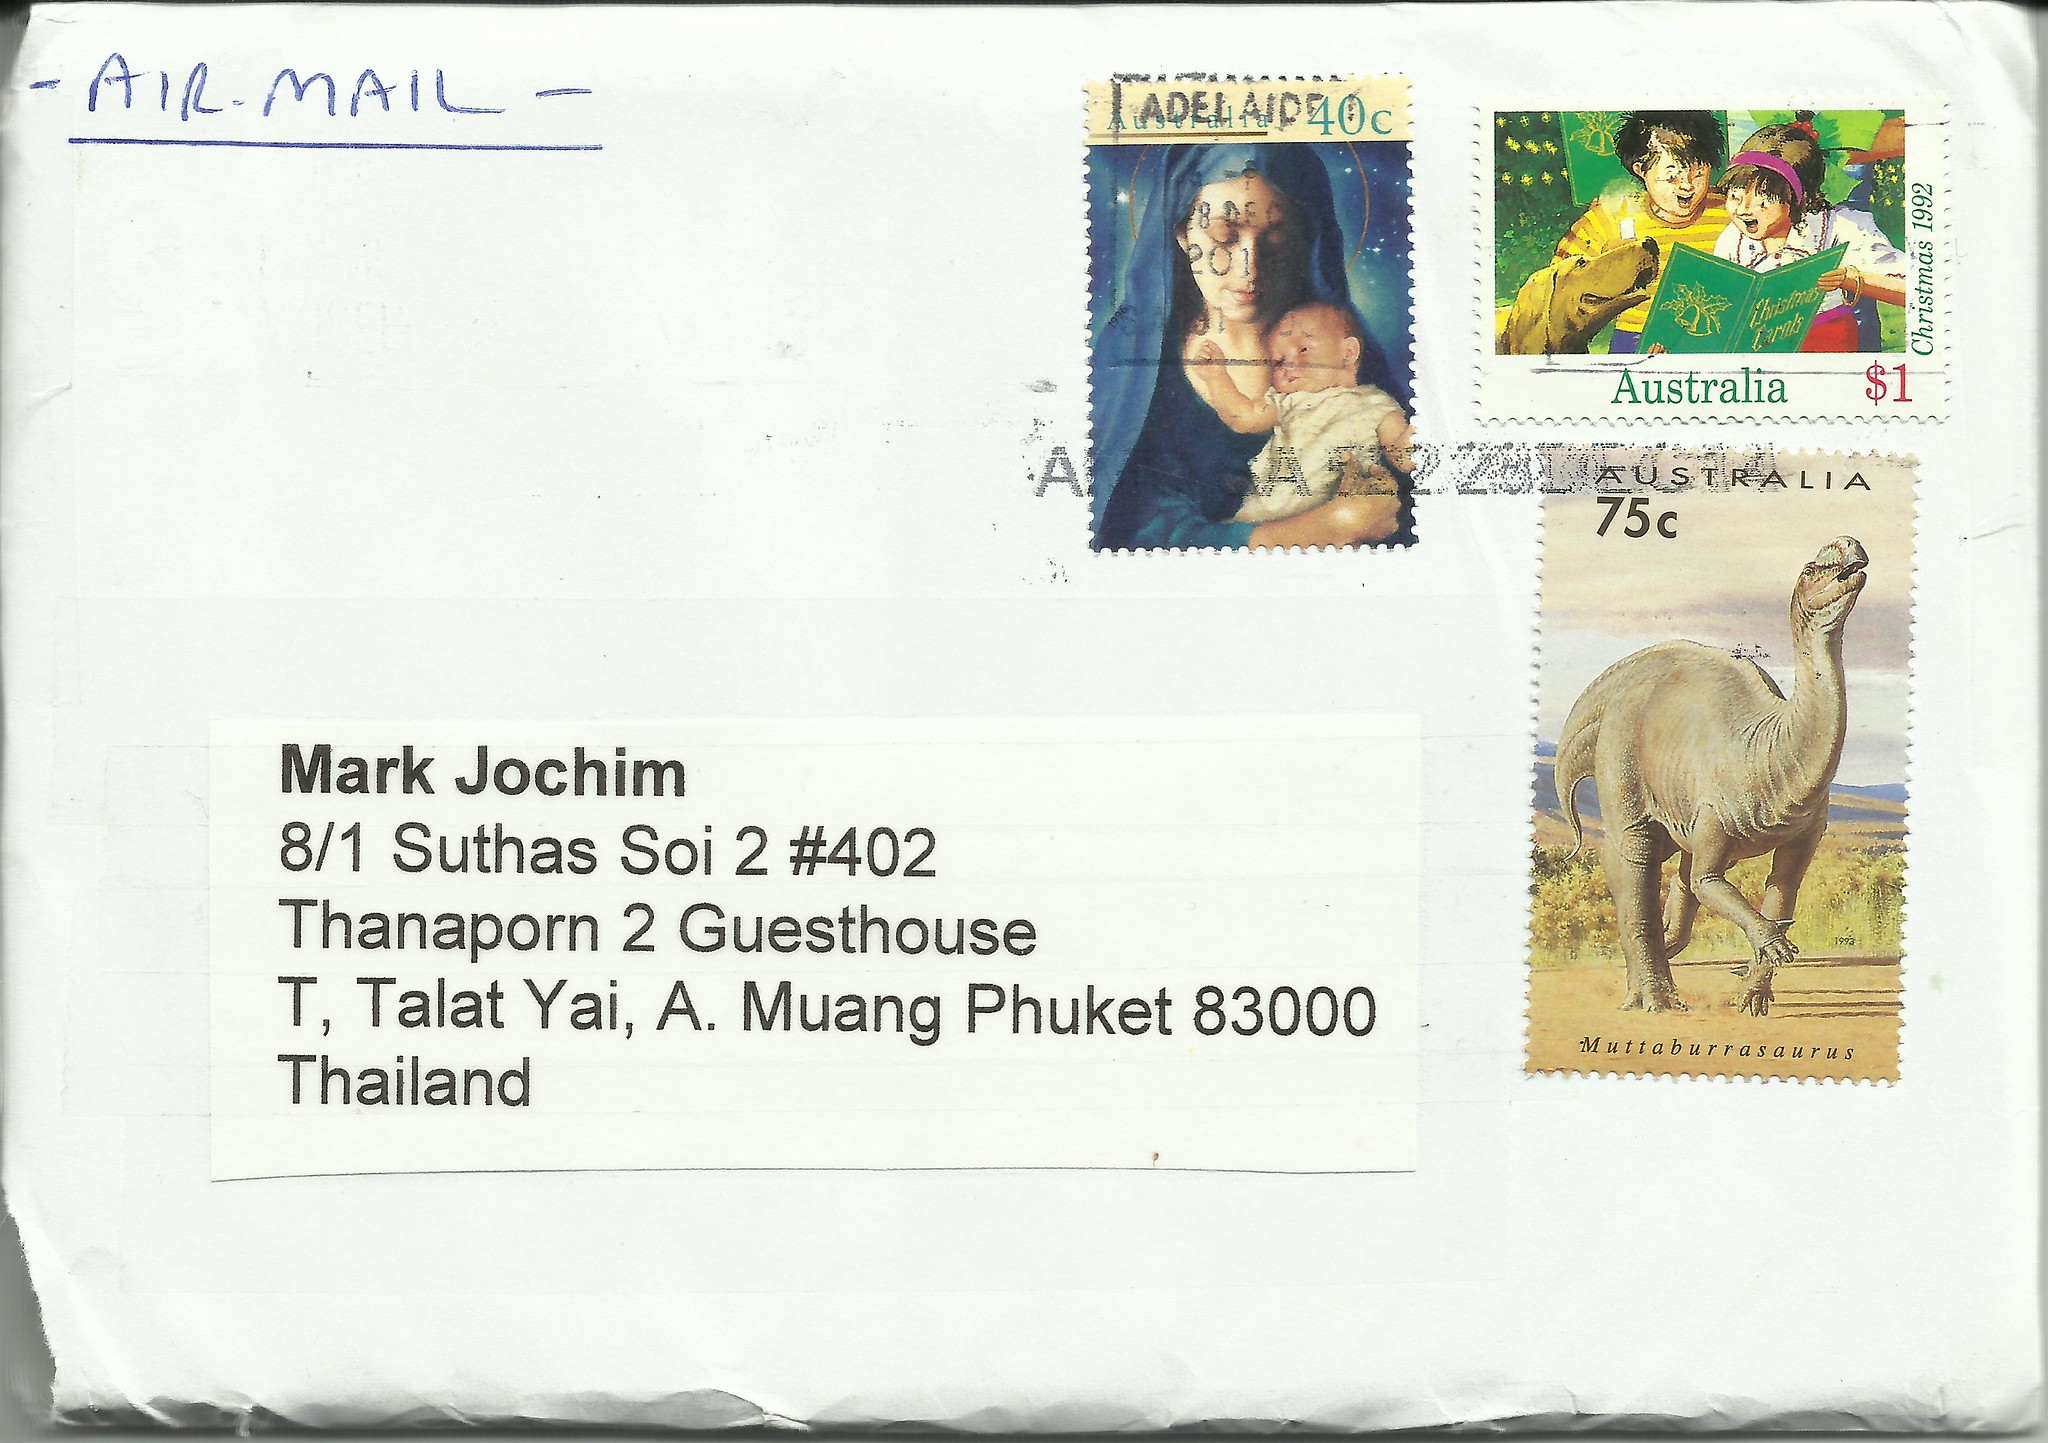 Cover mailed from Adelaide, Australia in late 2014 bearing a copy of Scott #1346.